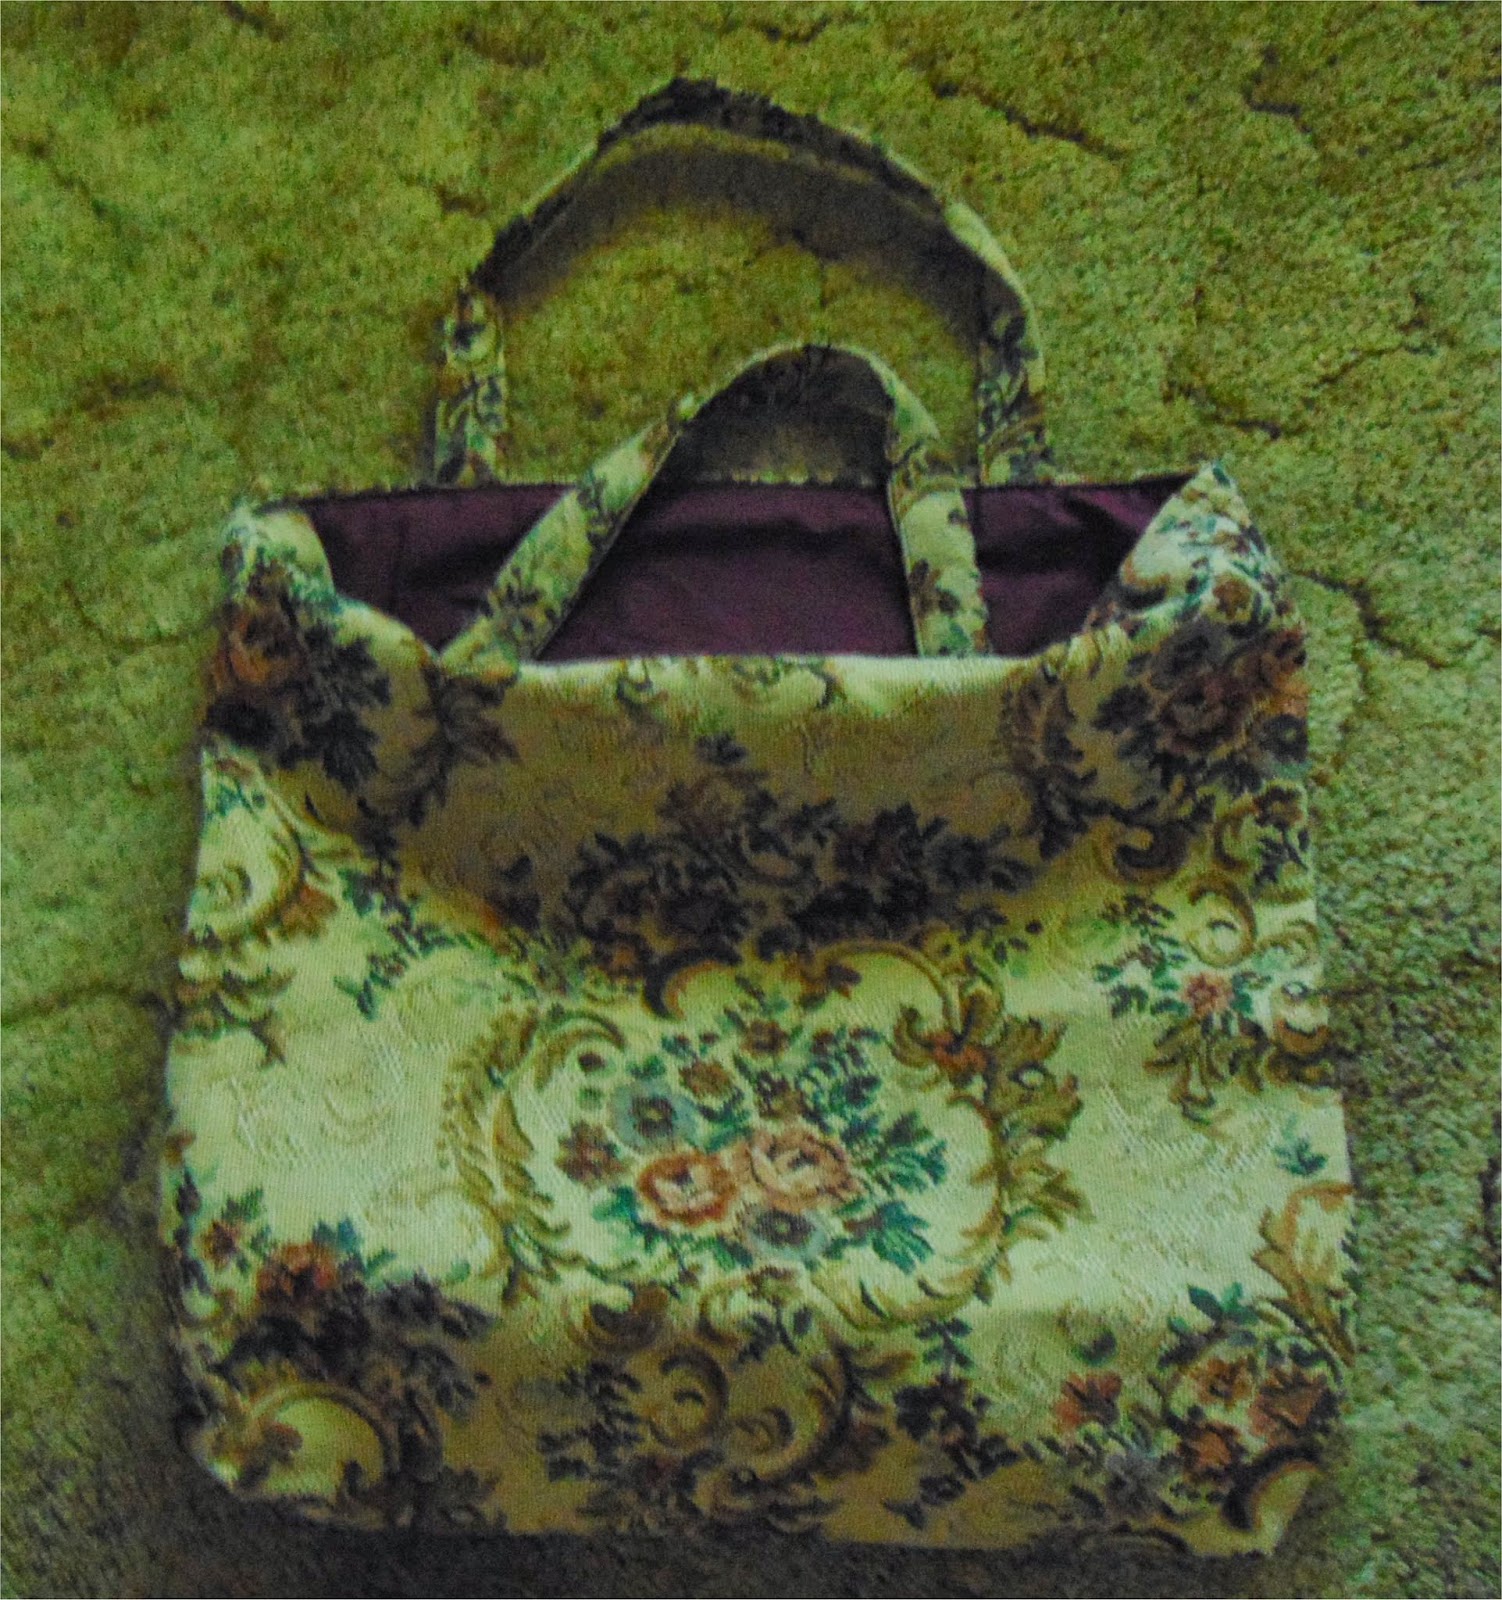 Tote bag made of upholstery fabric with fall flowers